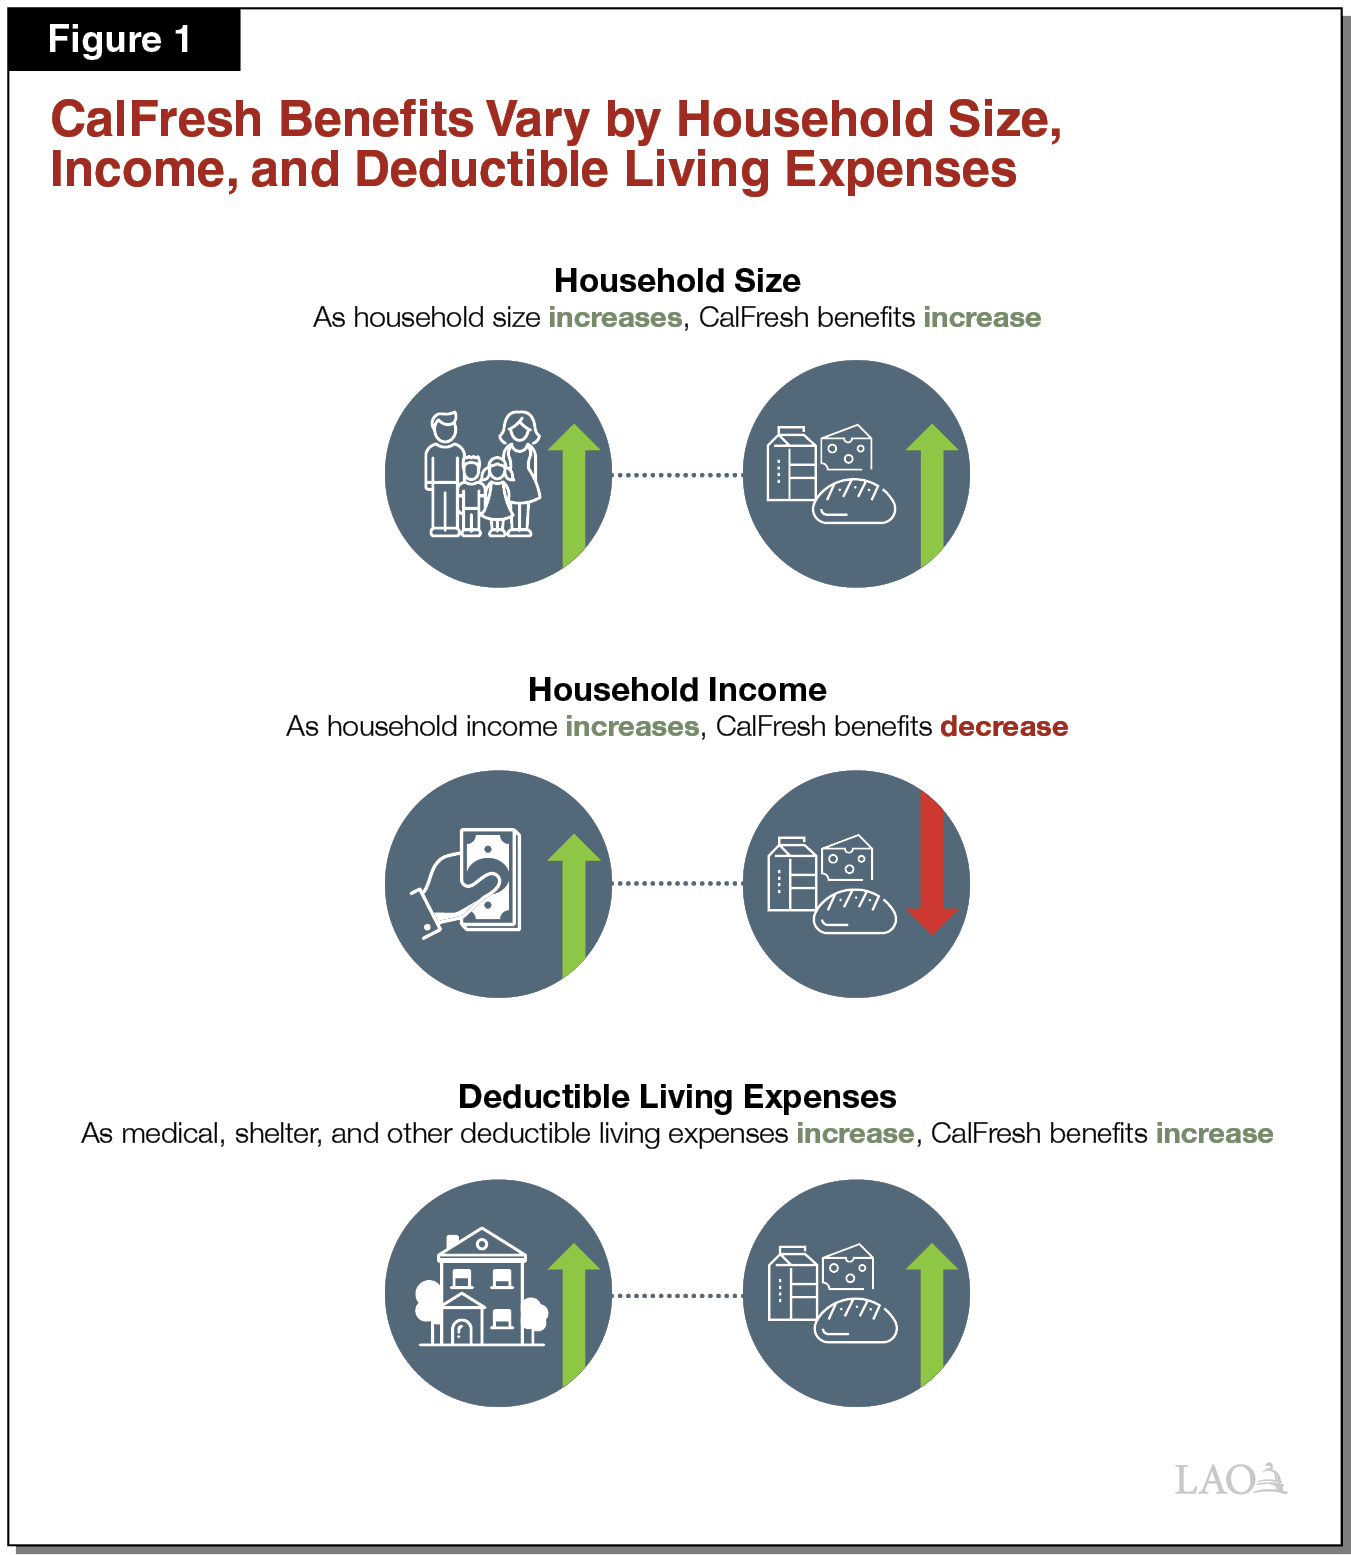 CalFresh Benefits Vary by Household Size, Income, and Deductible Living Expenses